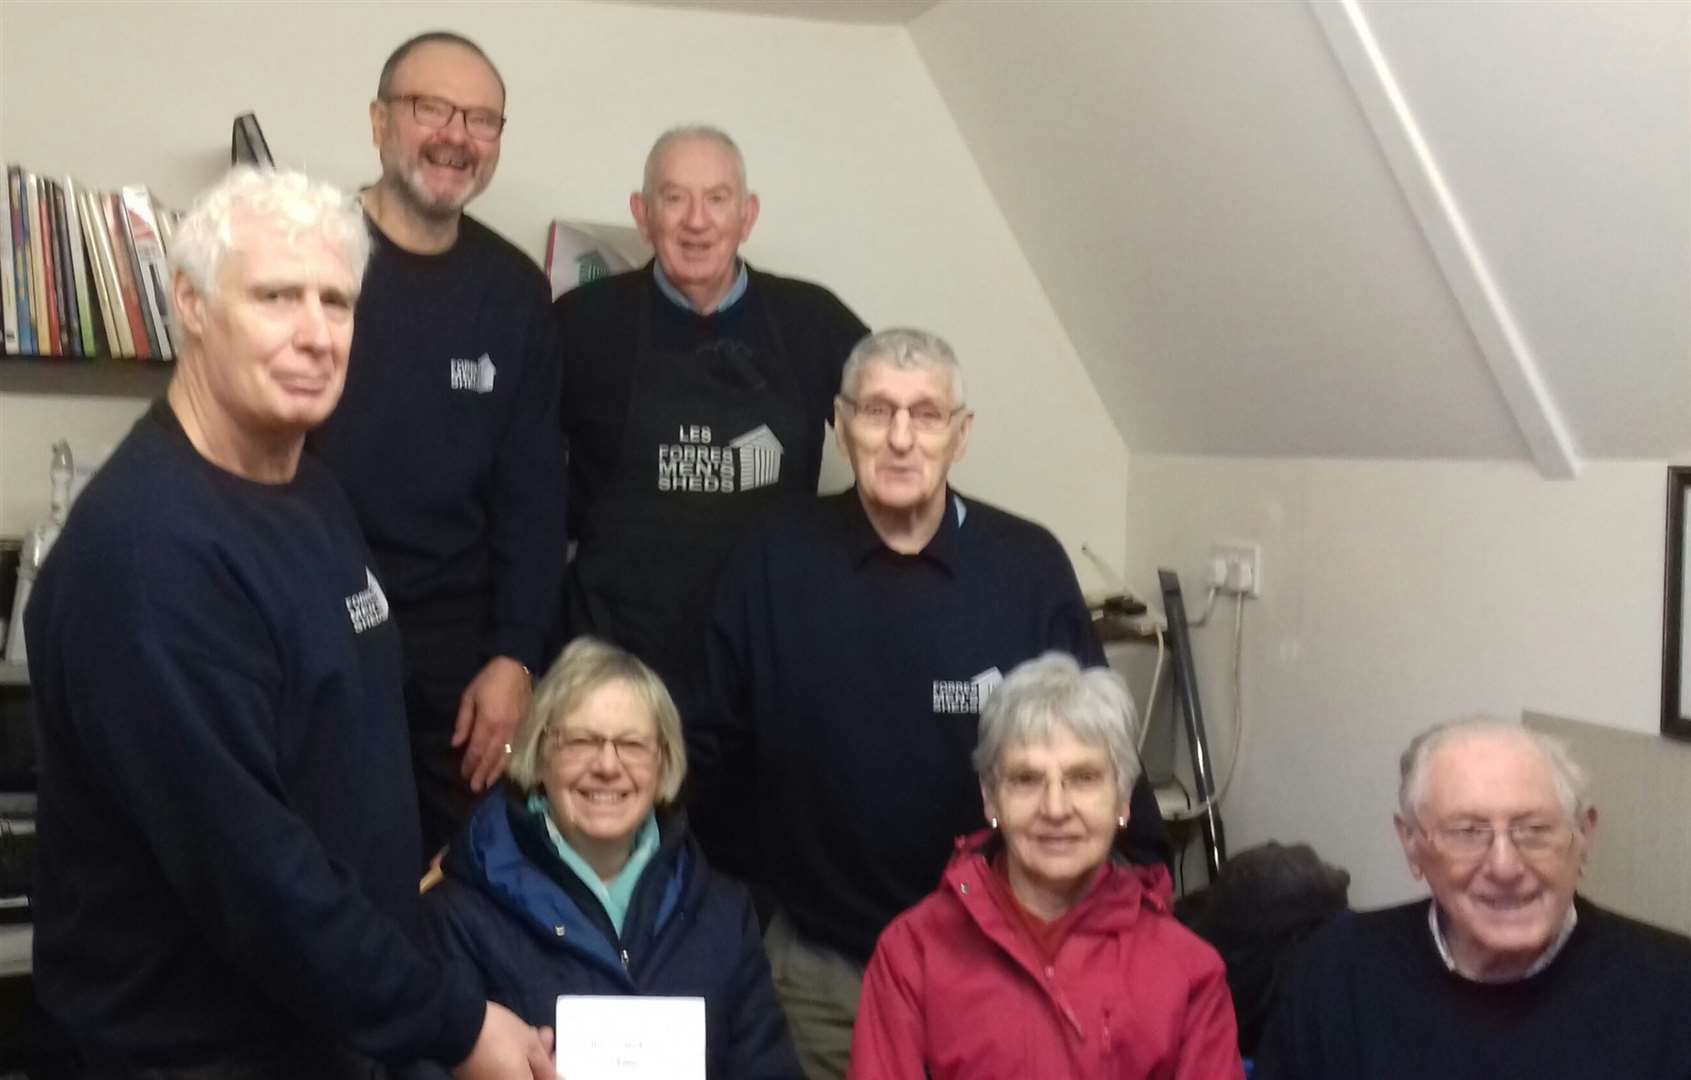 Forres Men’s Shed members (from left) Tony Hartley, Geoffrey Wilcock, Les Wilkinson, Davy Bell and Bill Valentine handling over a cheque to Forres McMillan Cancer Support treasurer Irene Manson and member Elspeth McKenzie.